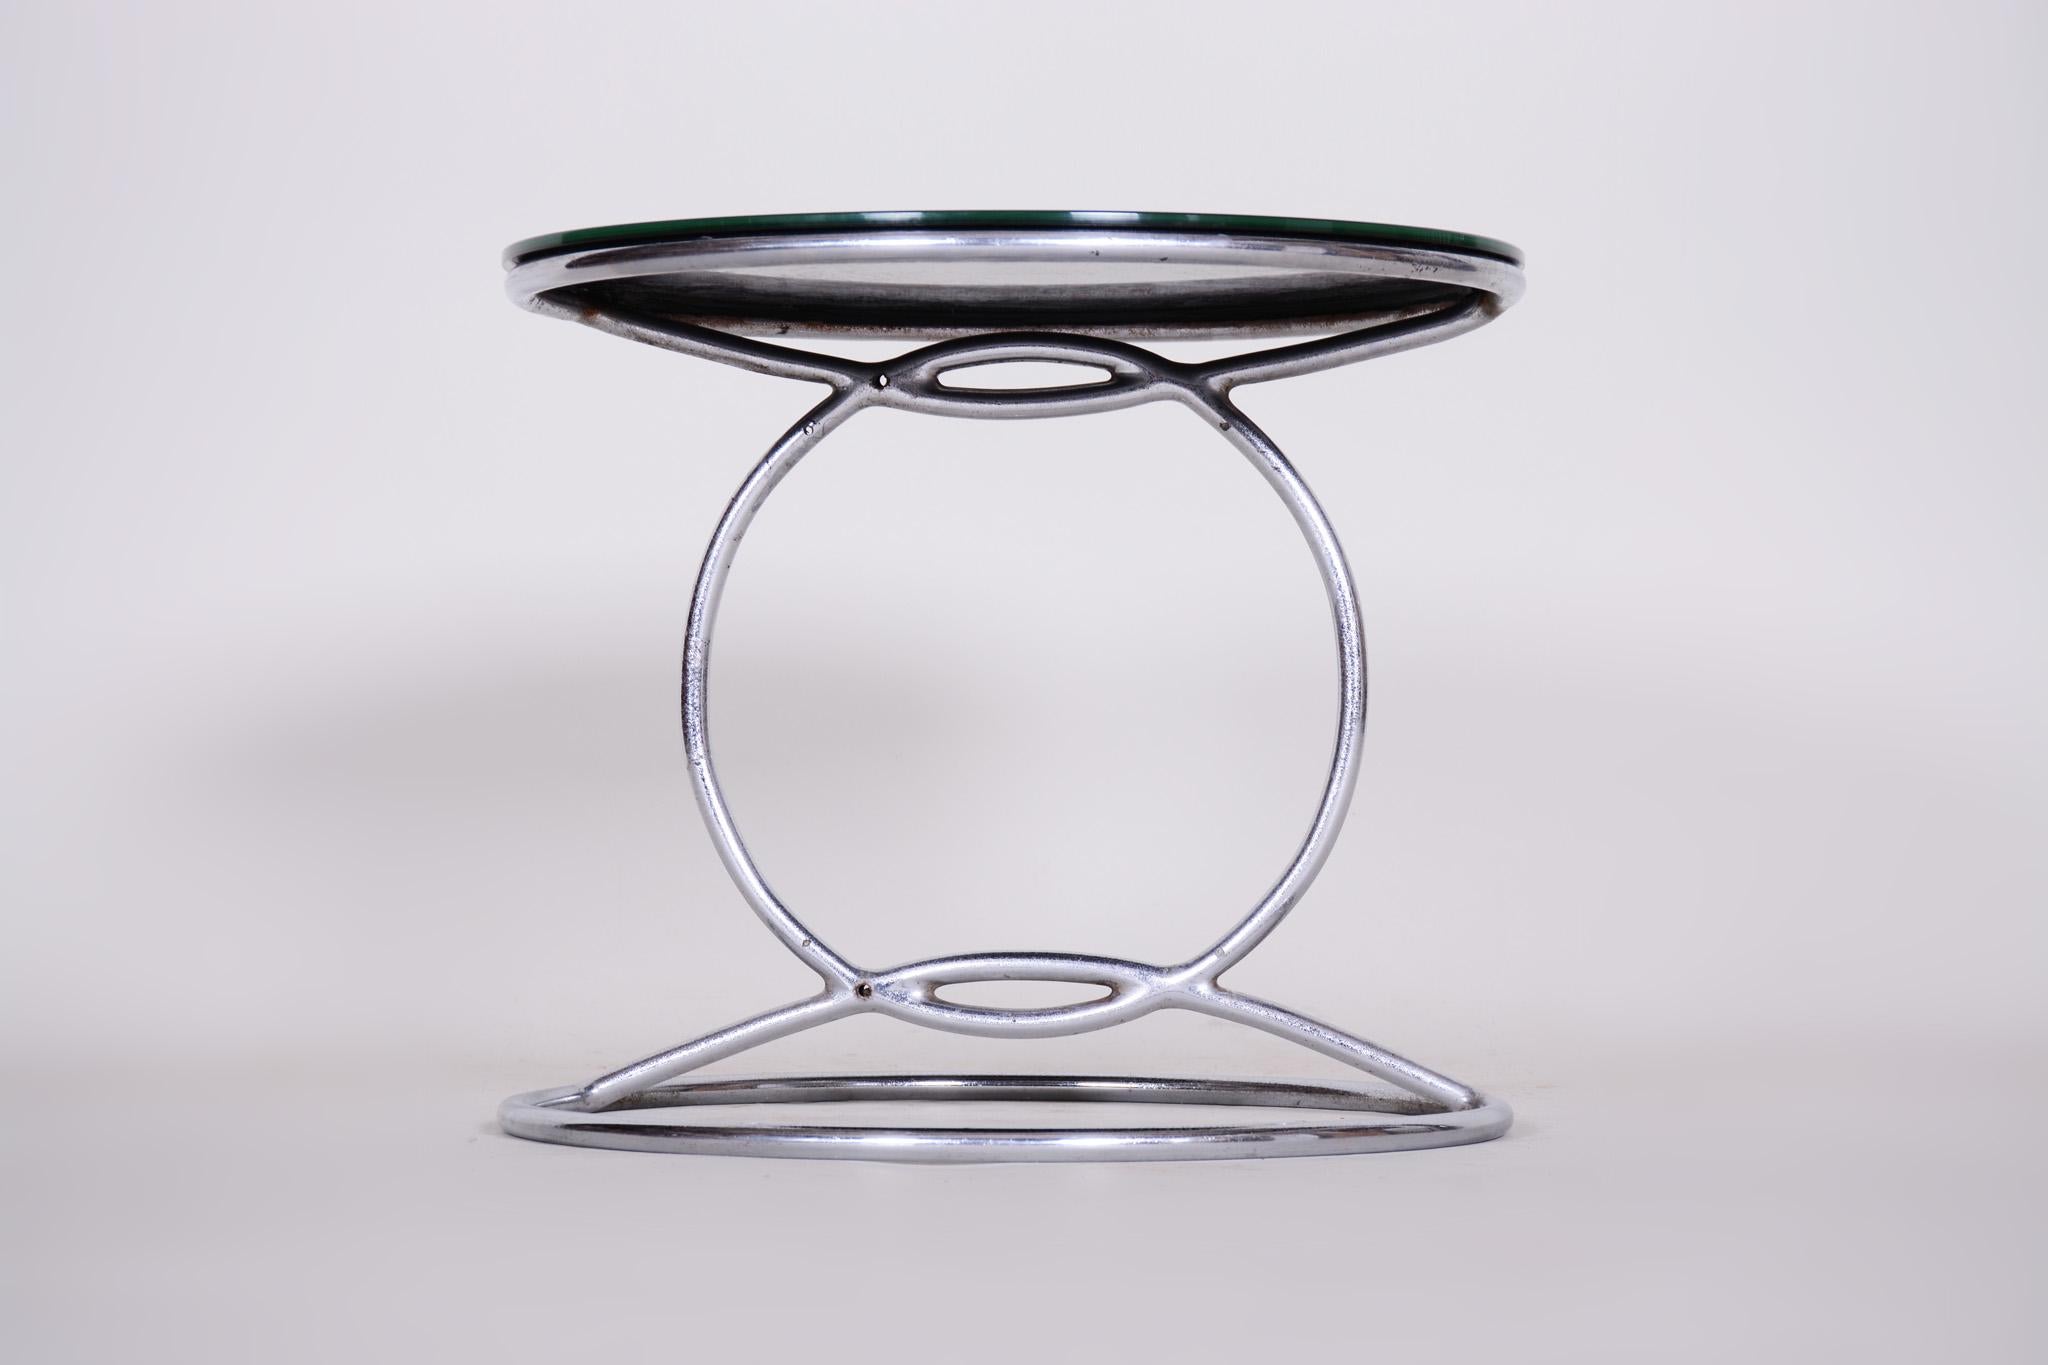 Unusual Chrome Bauhaus Round Small Table, 1950s, Perfect Condition, Black glass 3